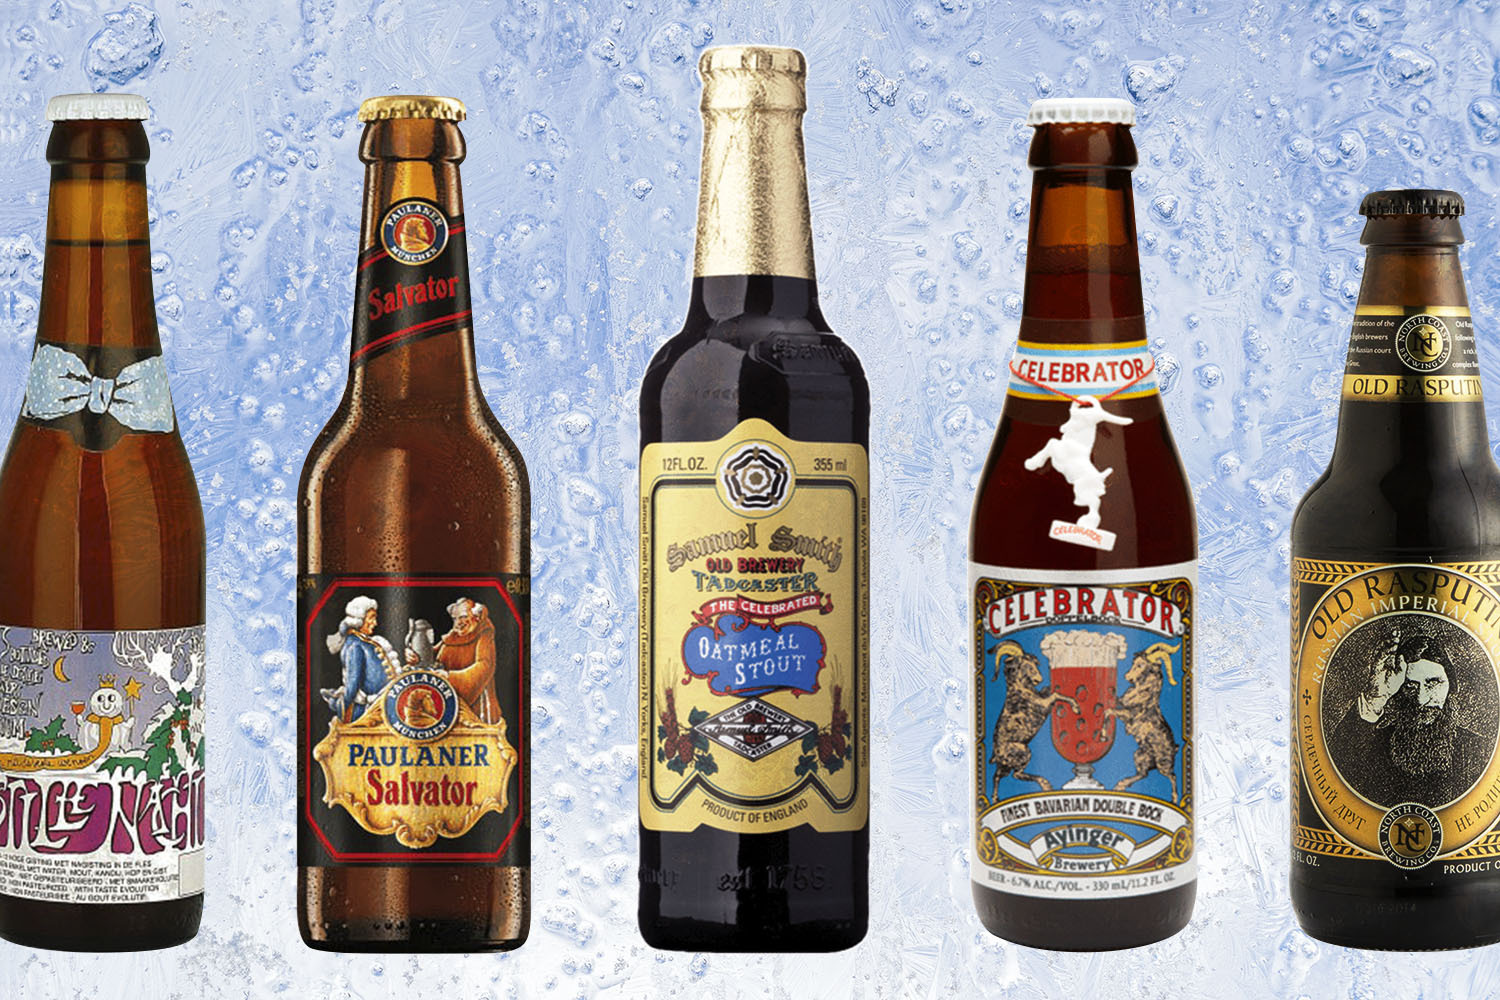 These are the beers the pros reach for on the coldest day of the year.